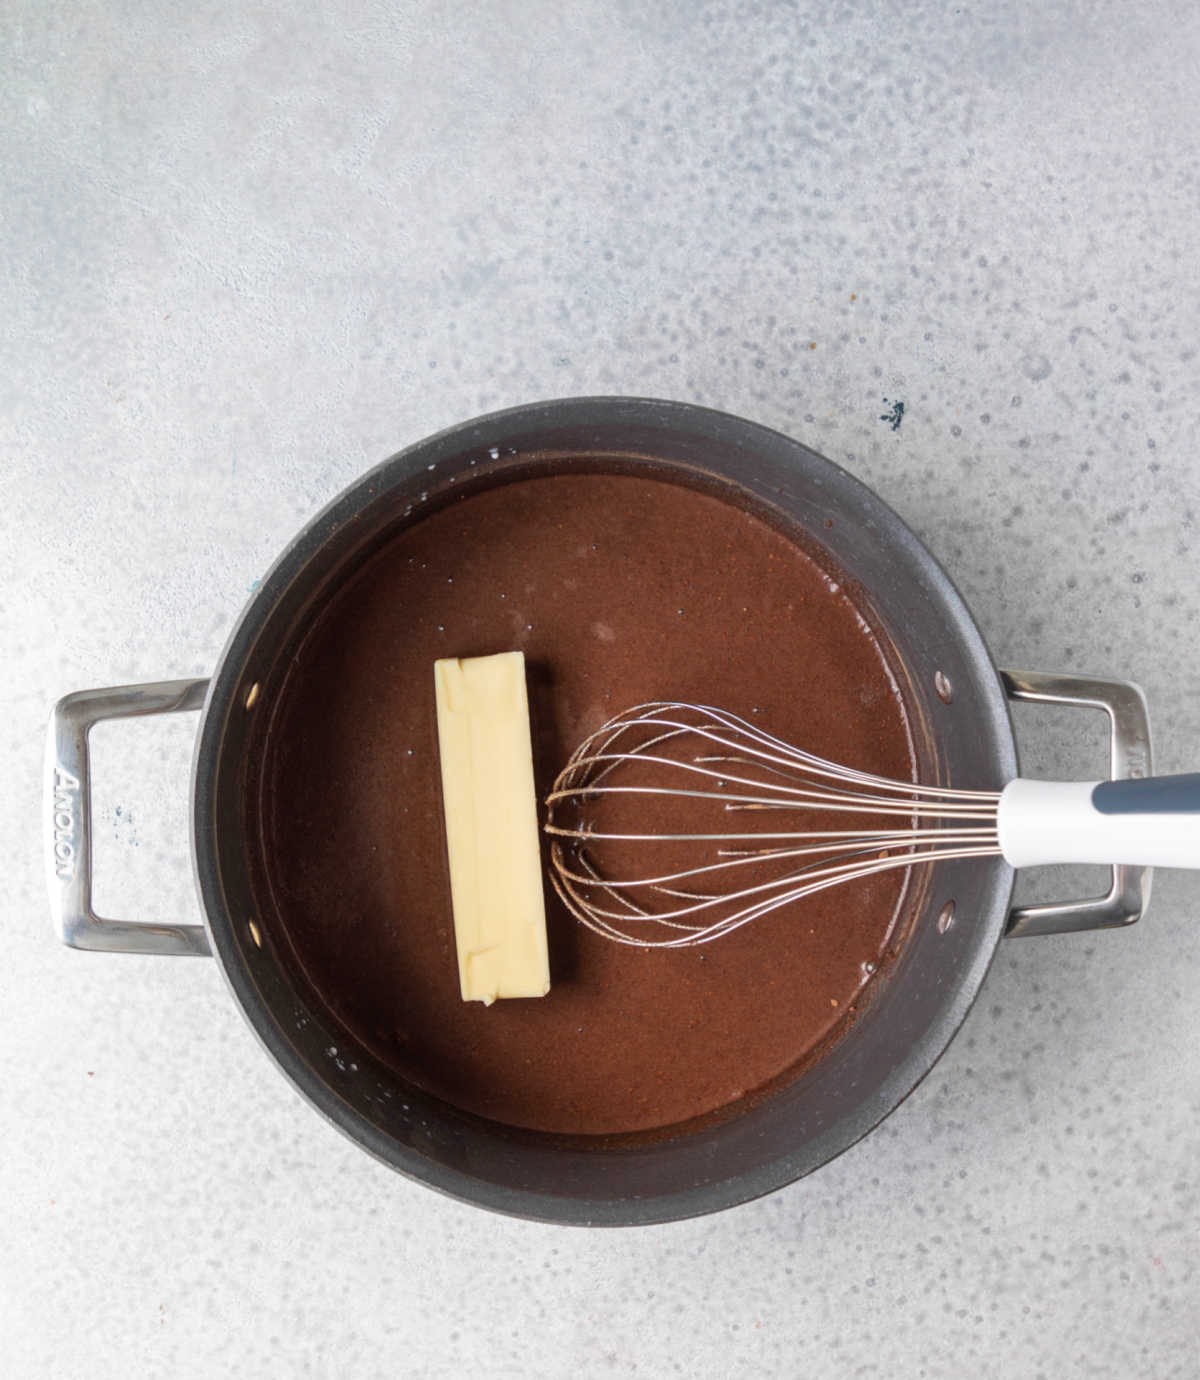 Butter and chocolate mixture in a saucepan.